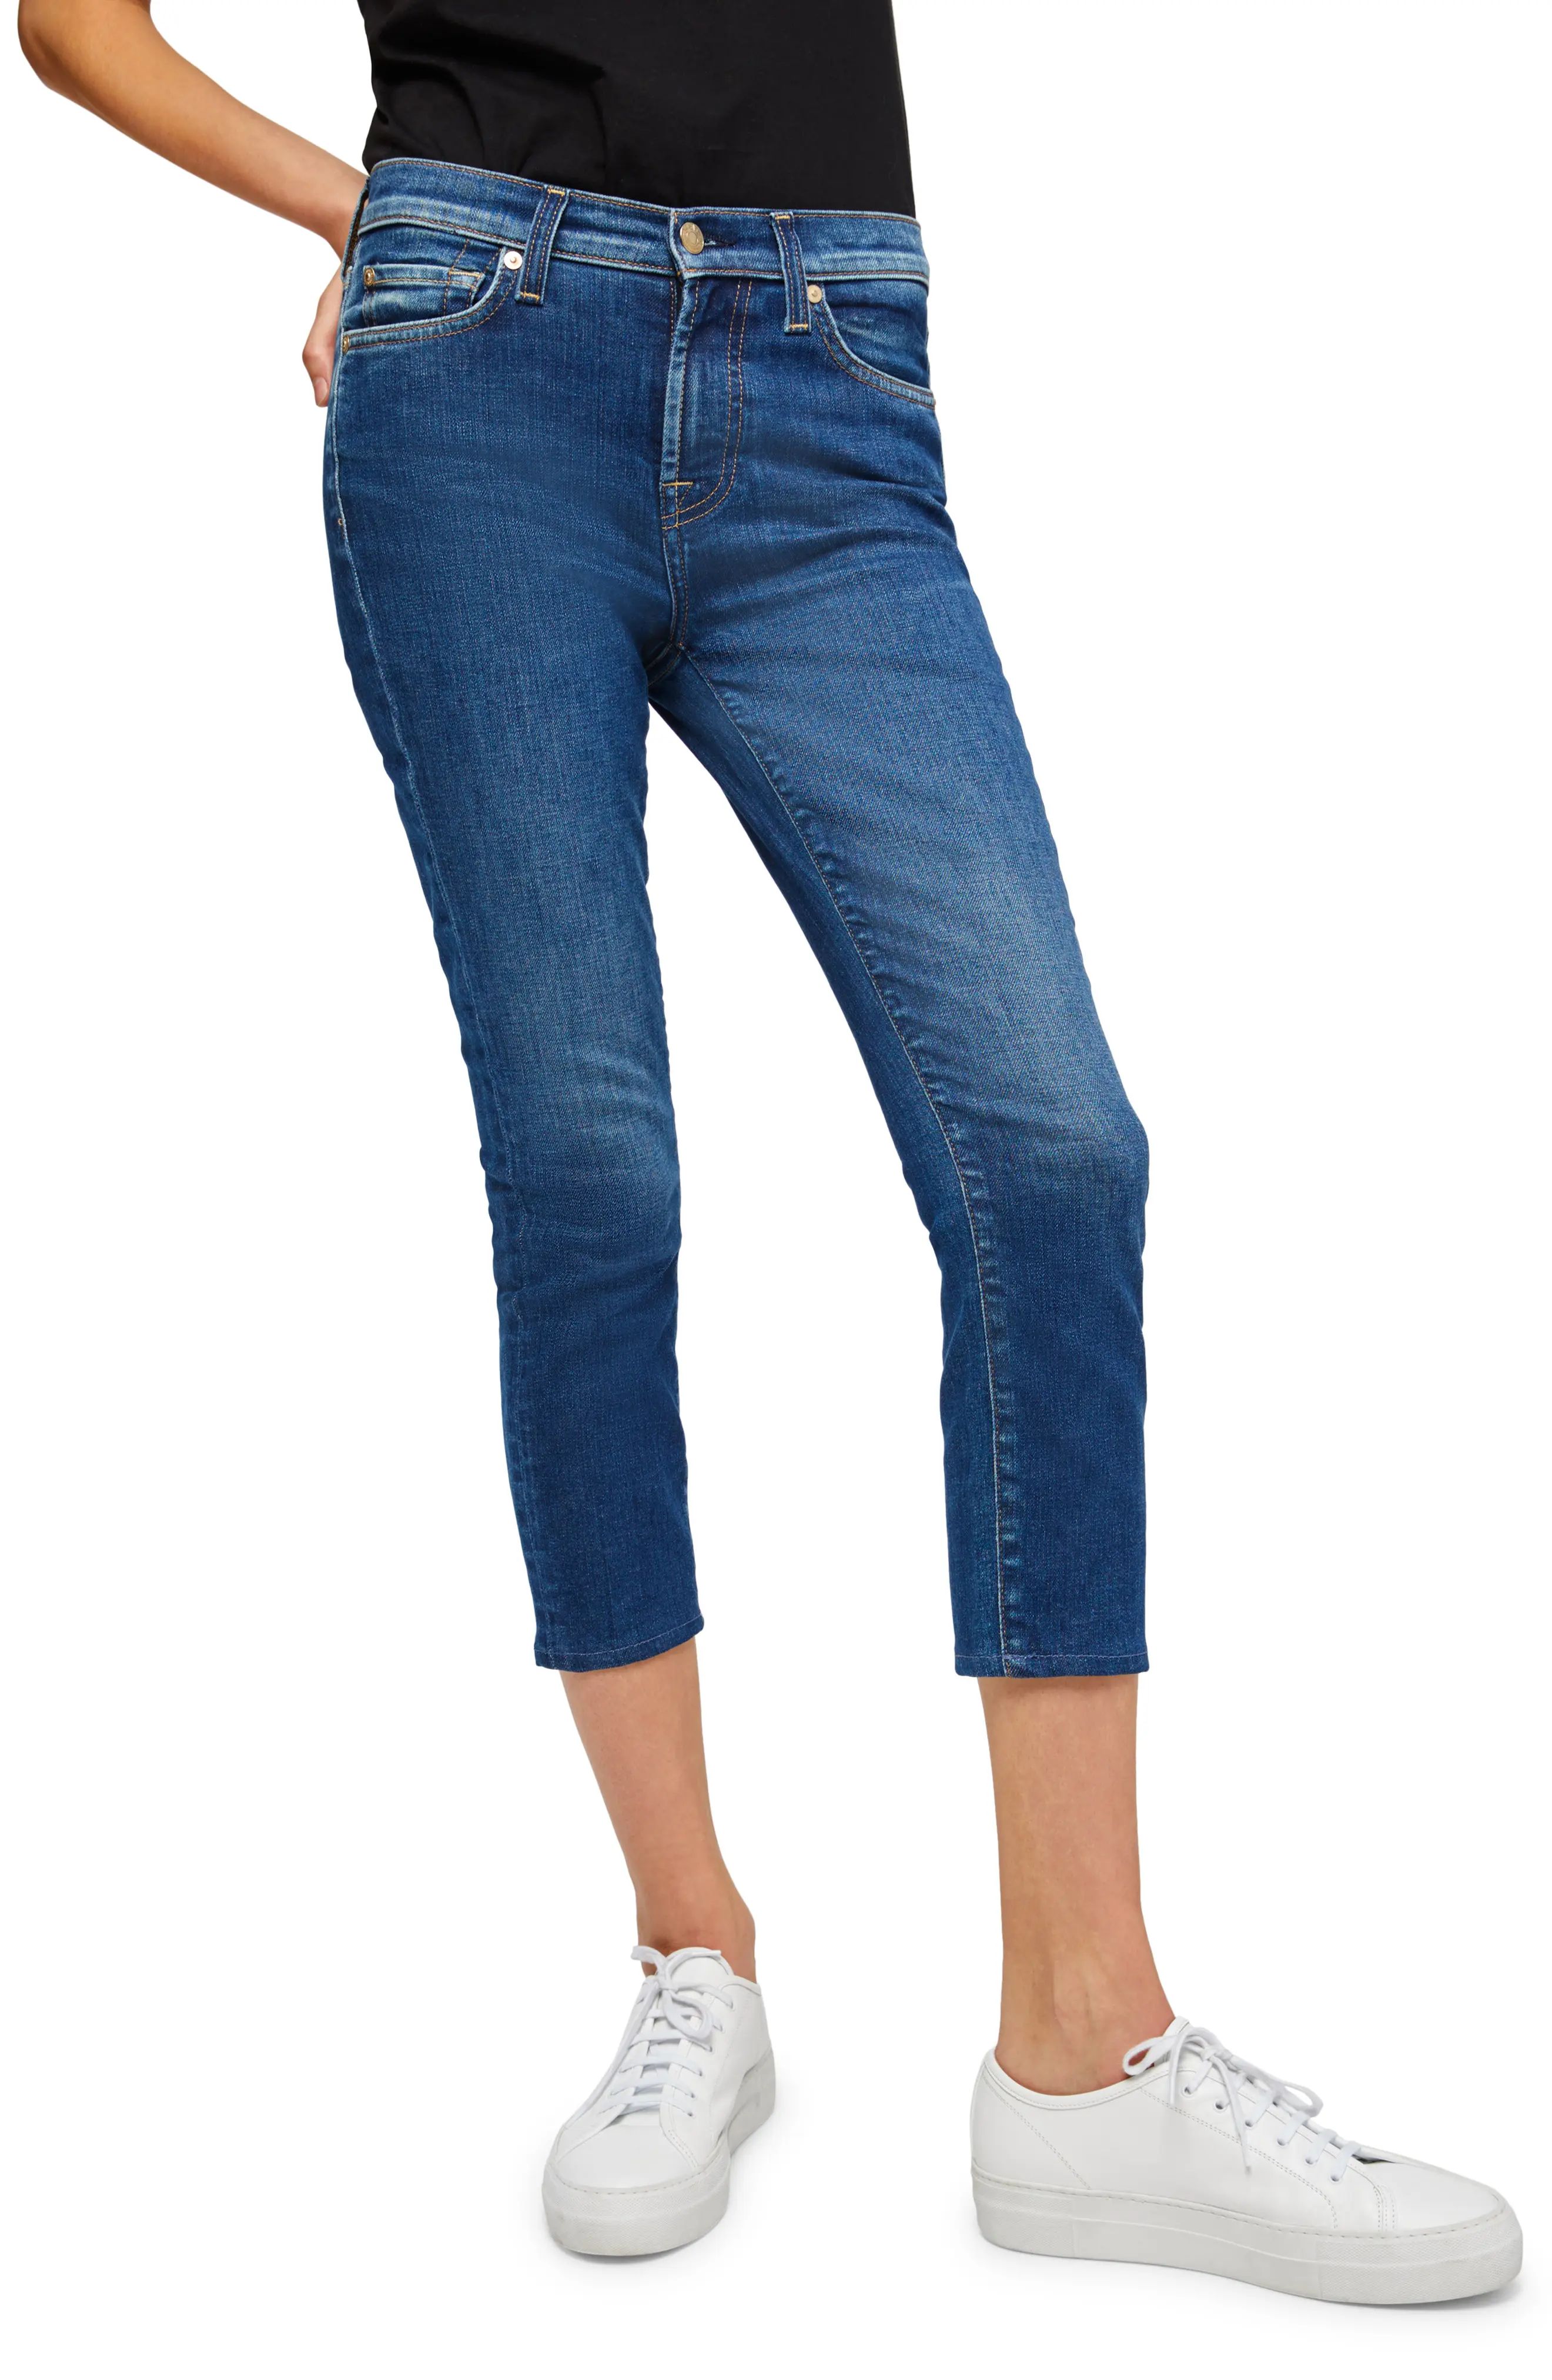 7 For All Mankind The Ankle Skinny Jeans in Venus at Nordstrom, Size 32 | Nordstrom